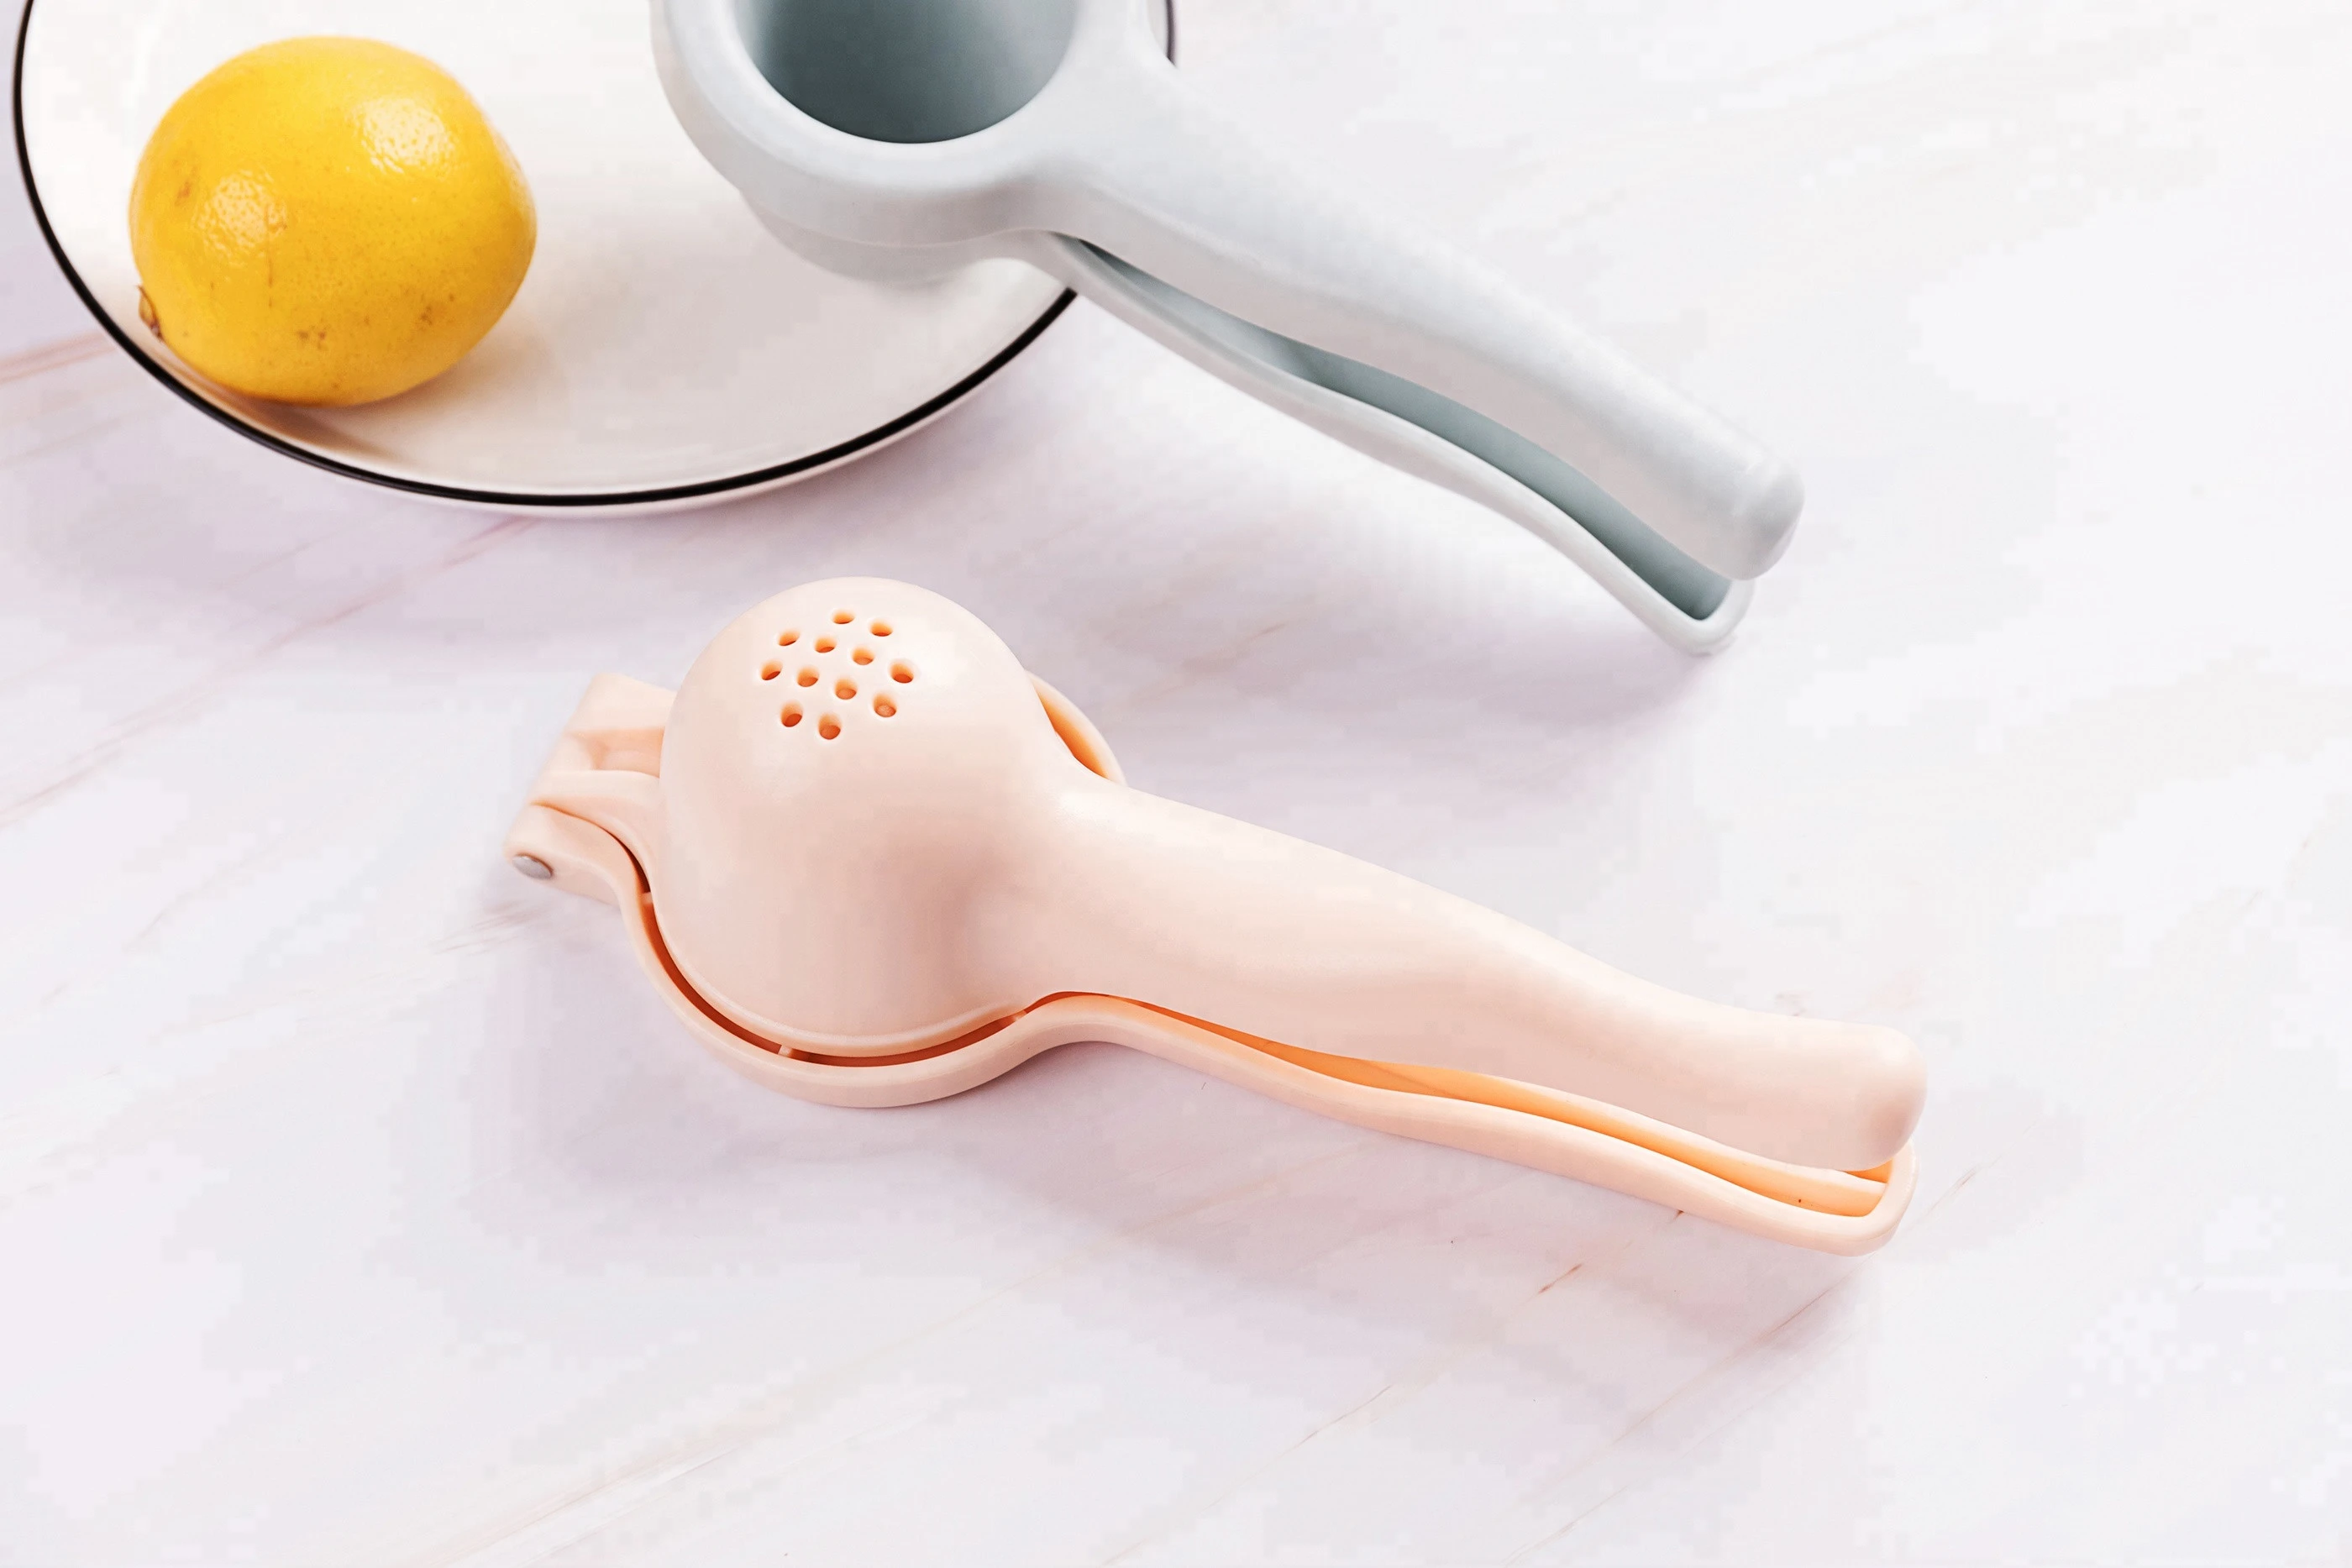 High-quality non-electric manual hand juicer